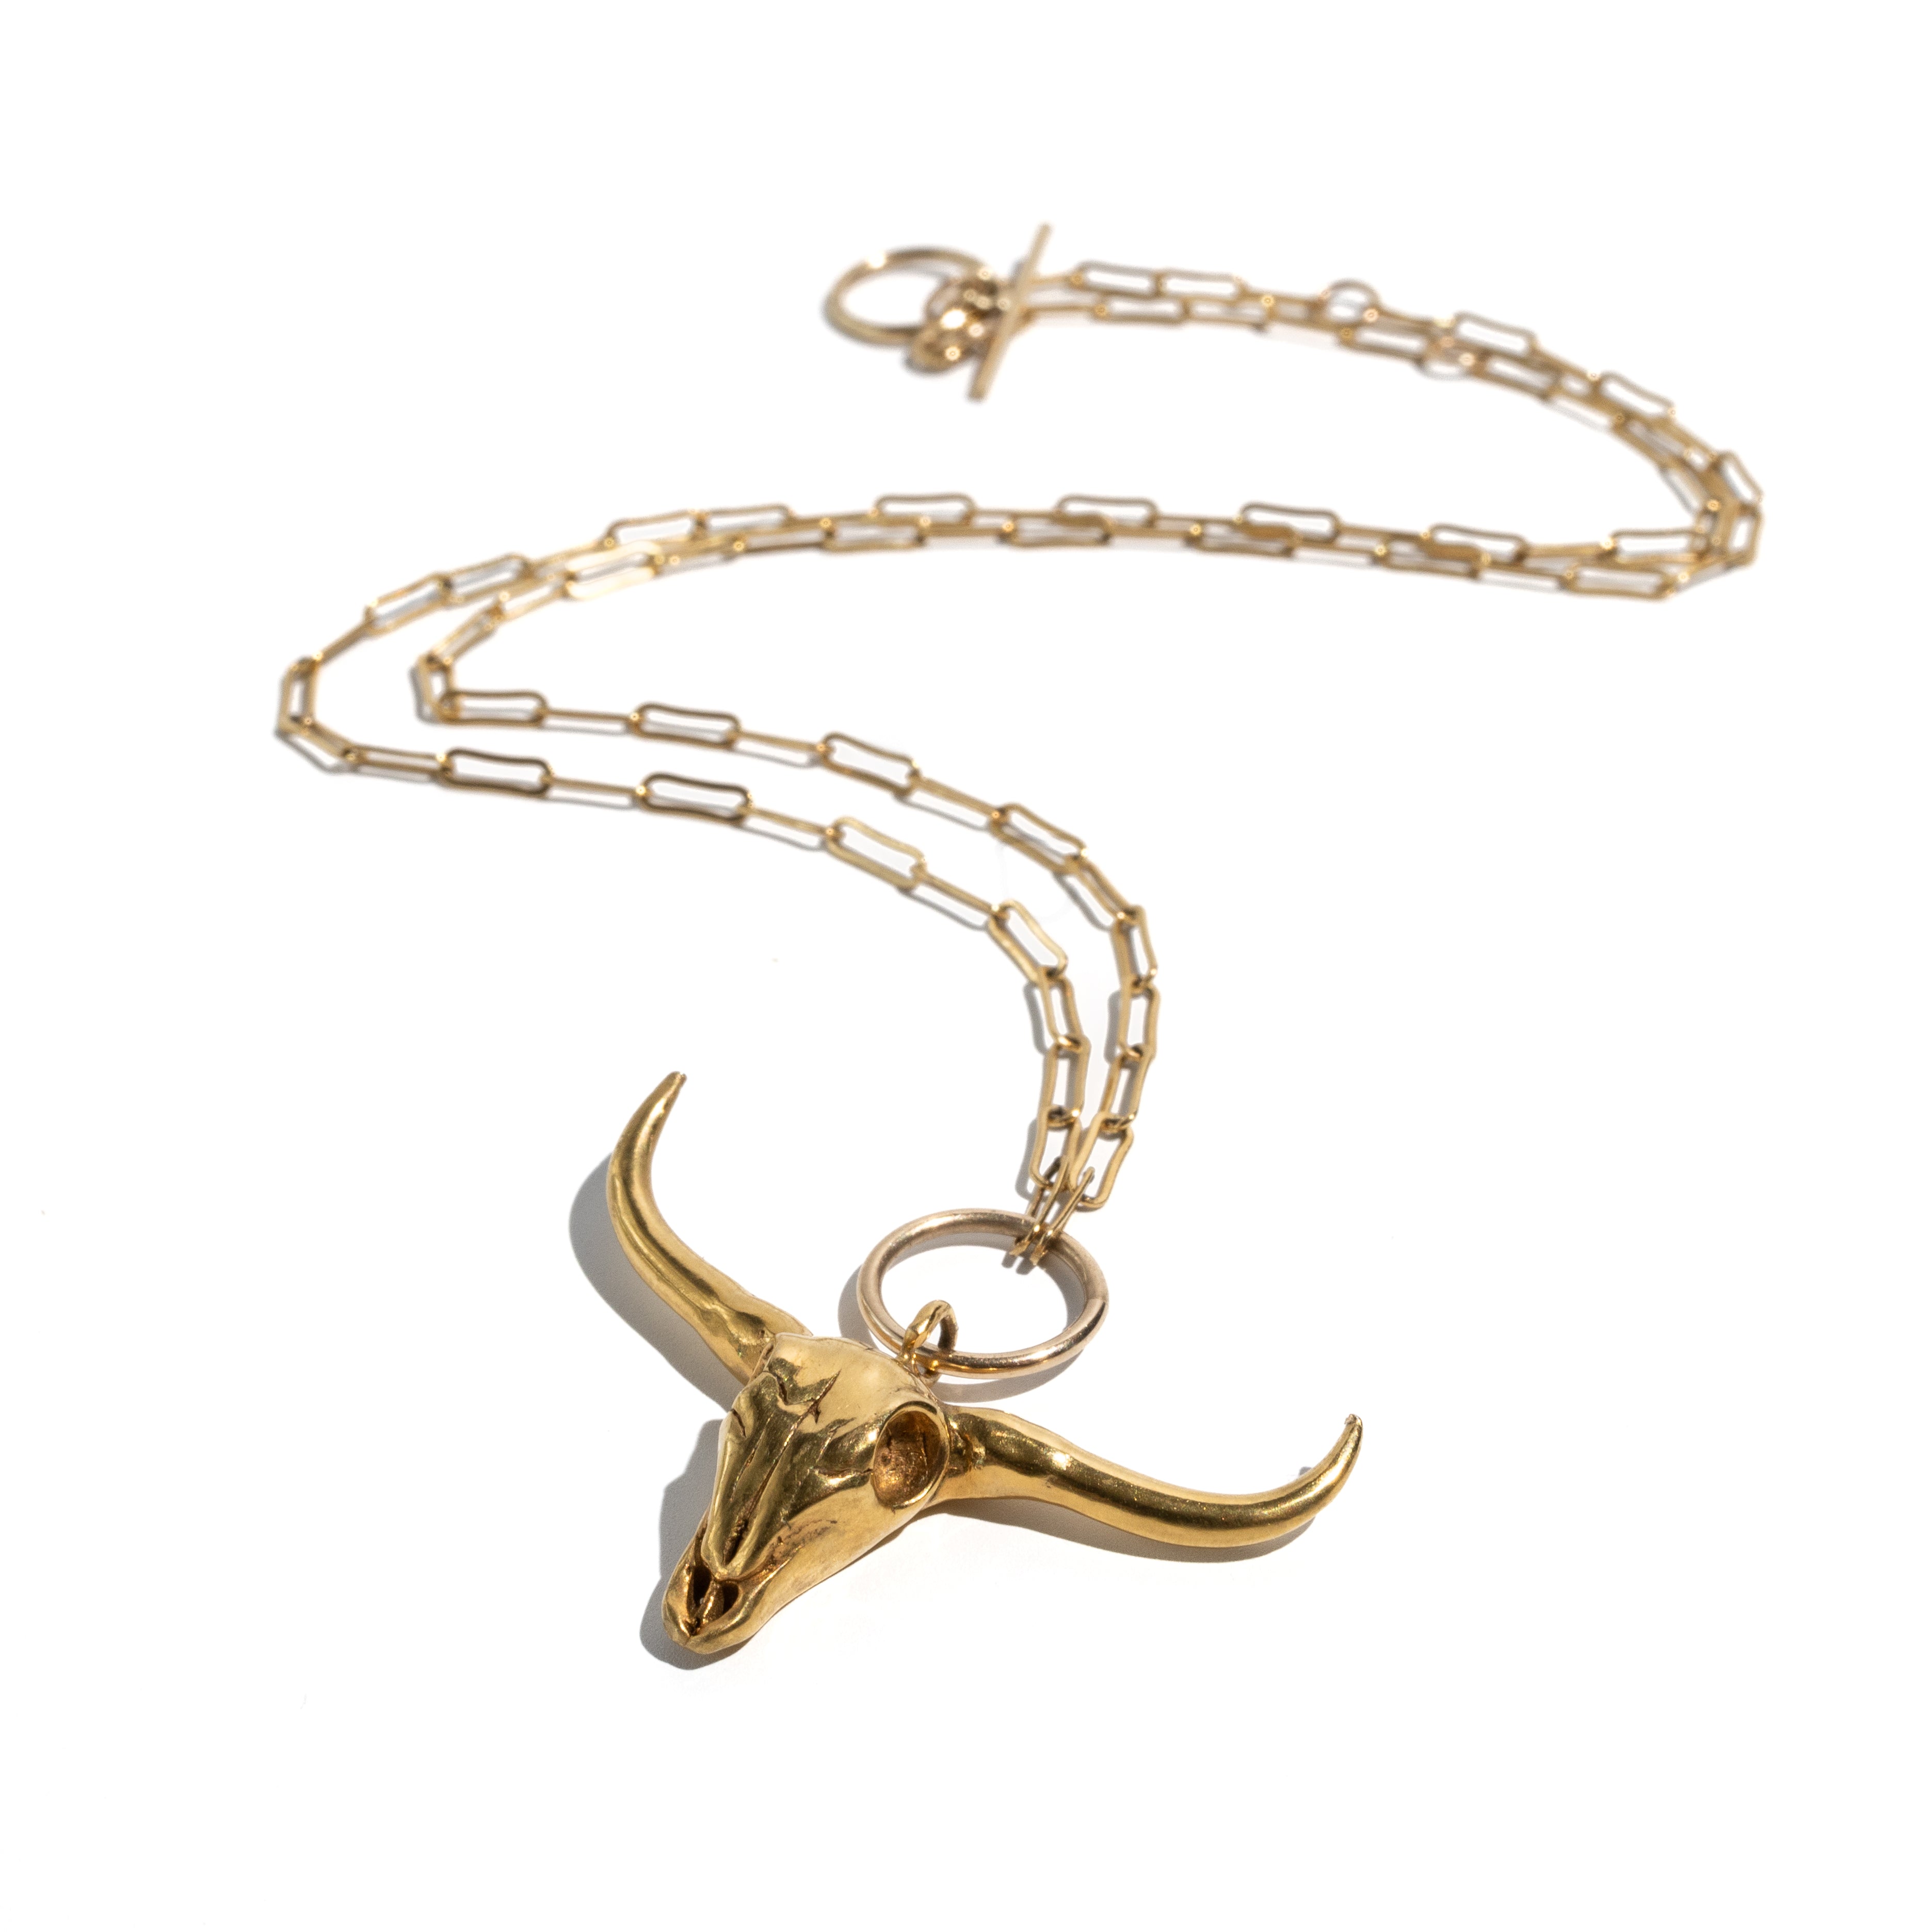 Flidais Skull Necklace - gold plate on sterling silver